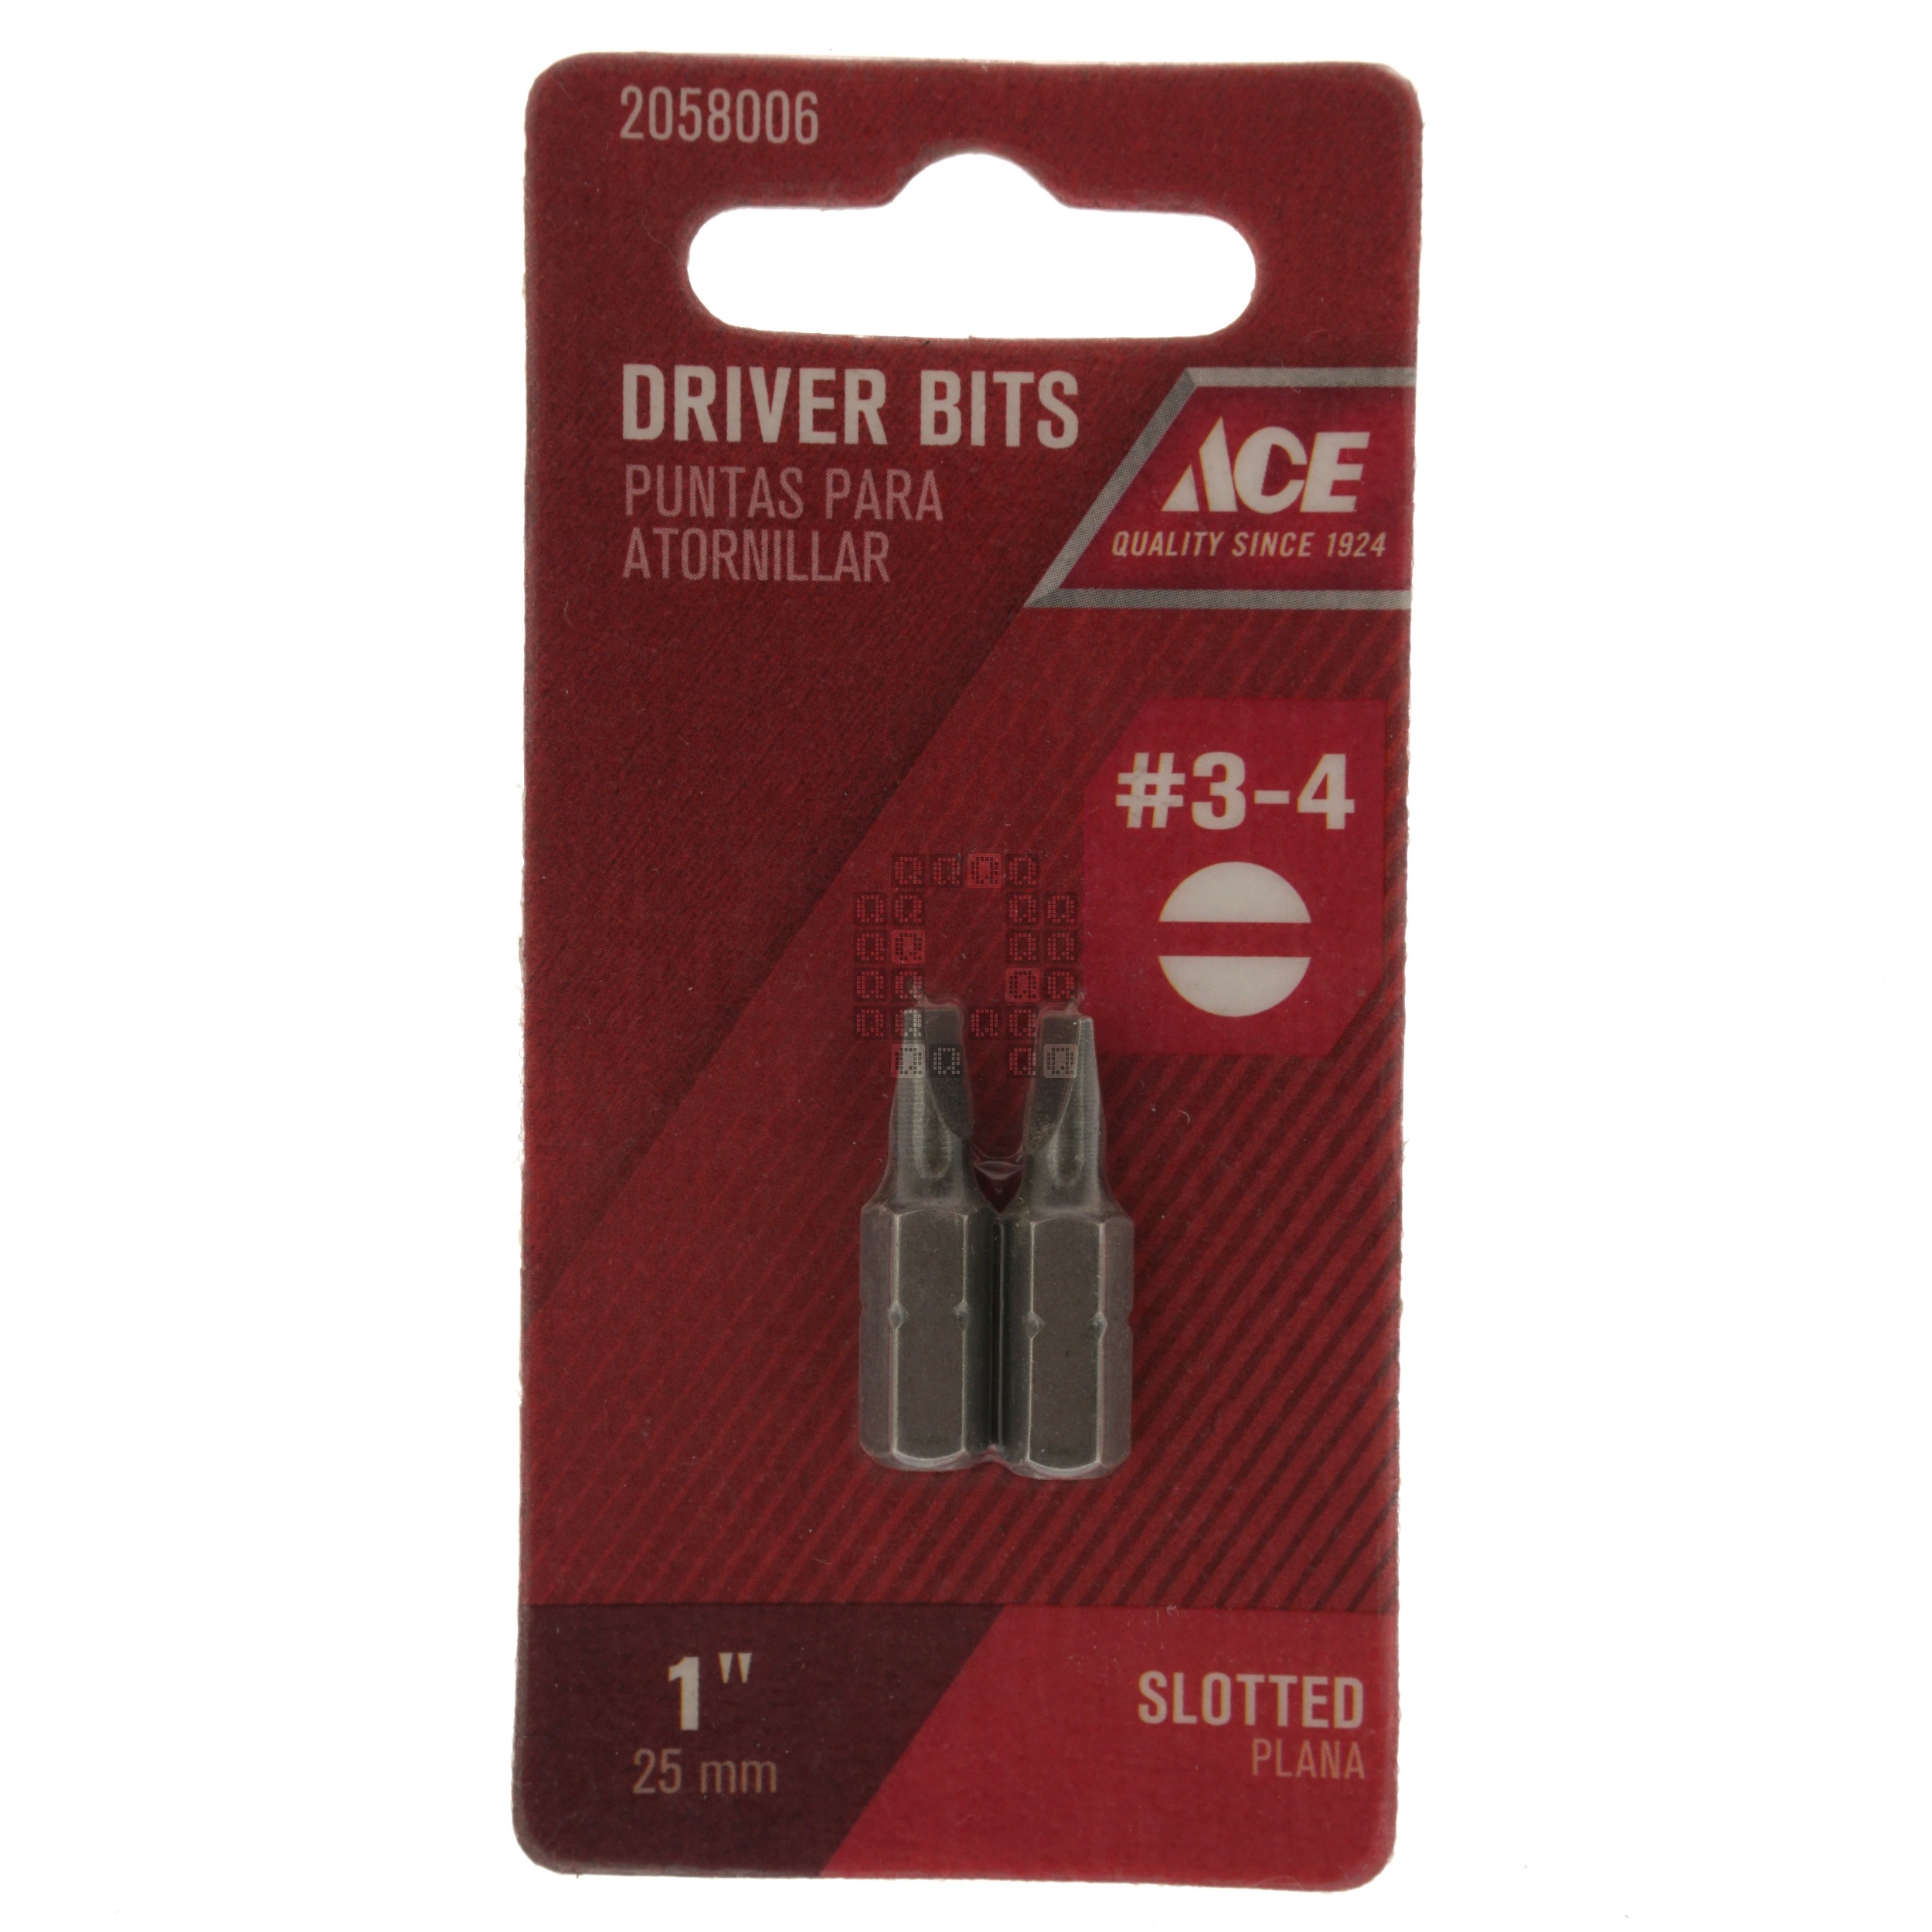 ACE Hardware 2058006 #3-4 Slotted Driver Bits, 1" Length, 1/4" Hex Drive, 2-Pack